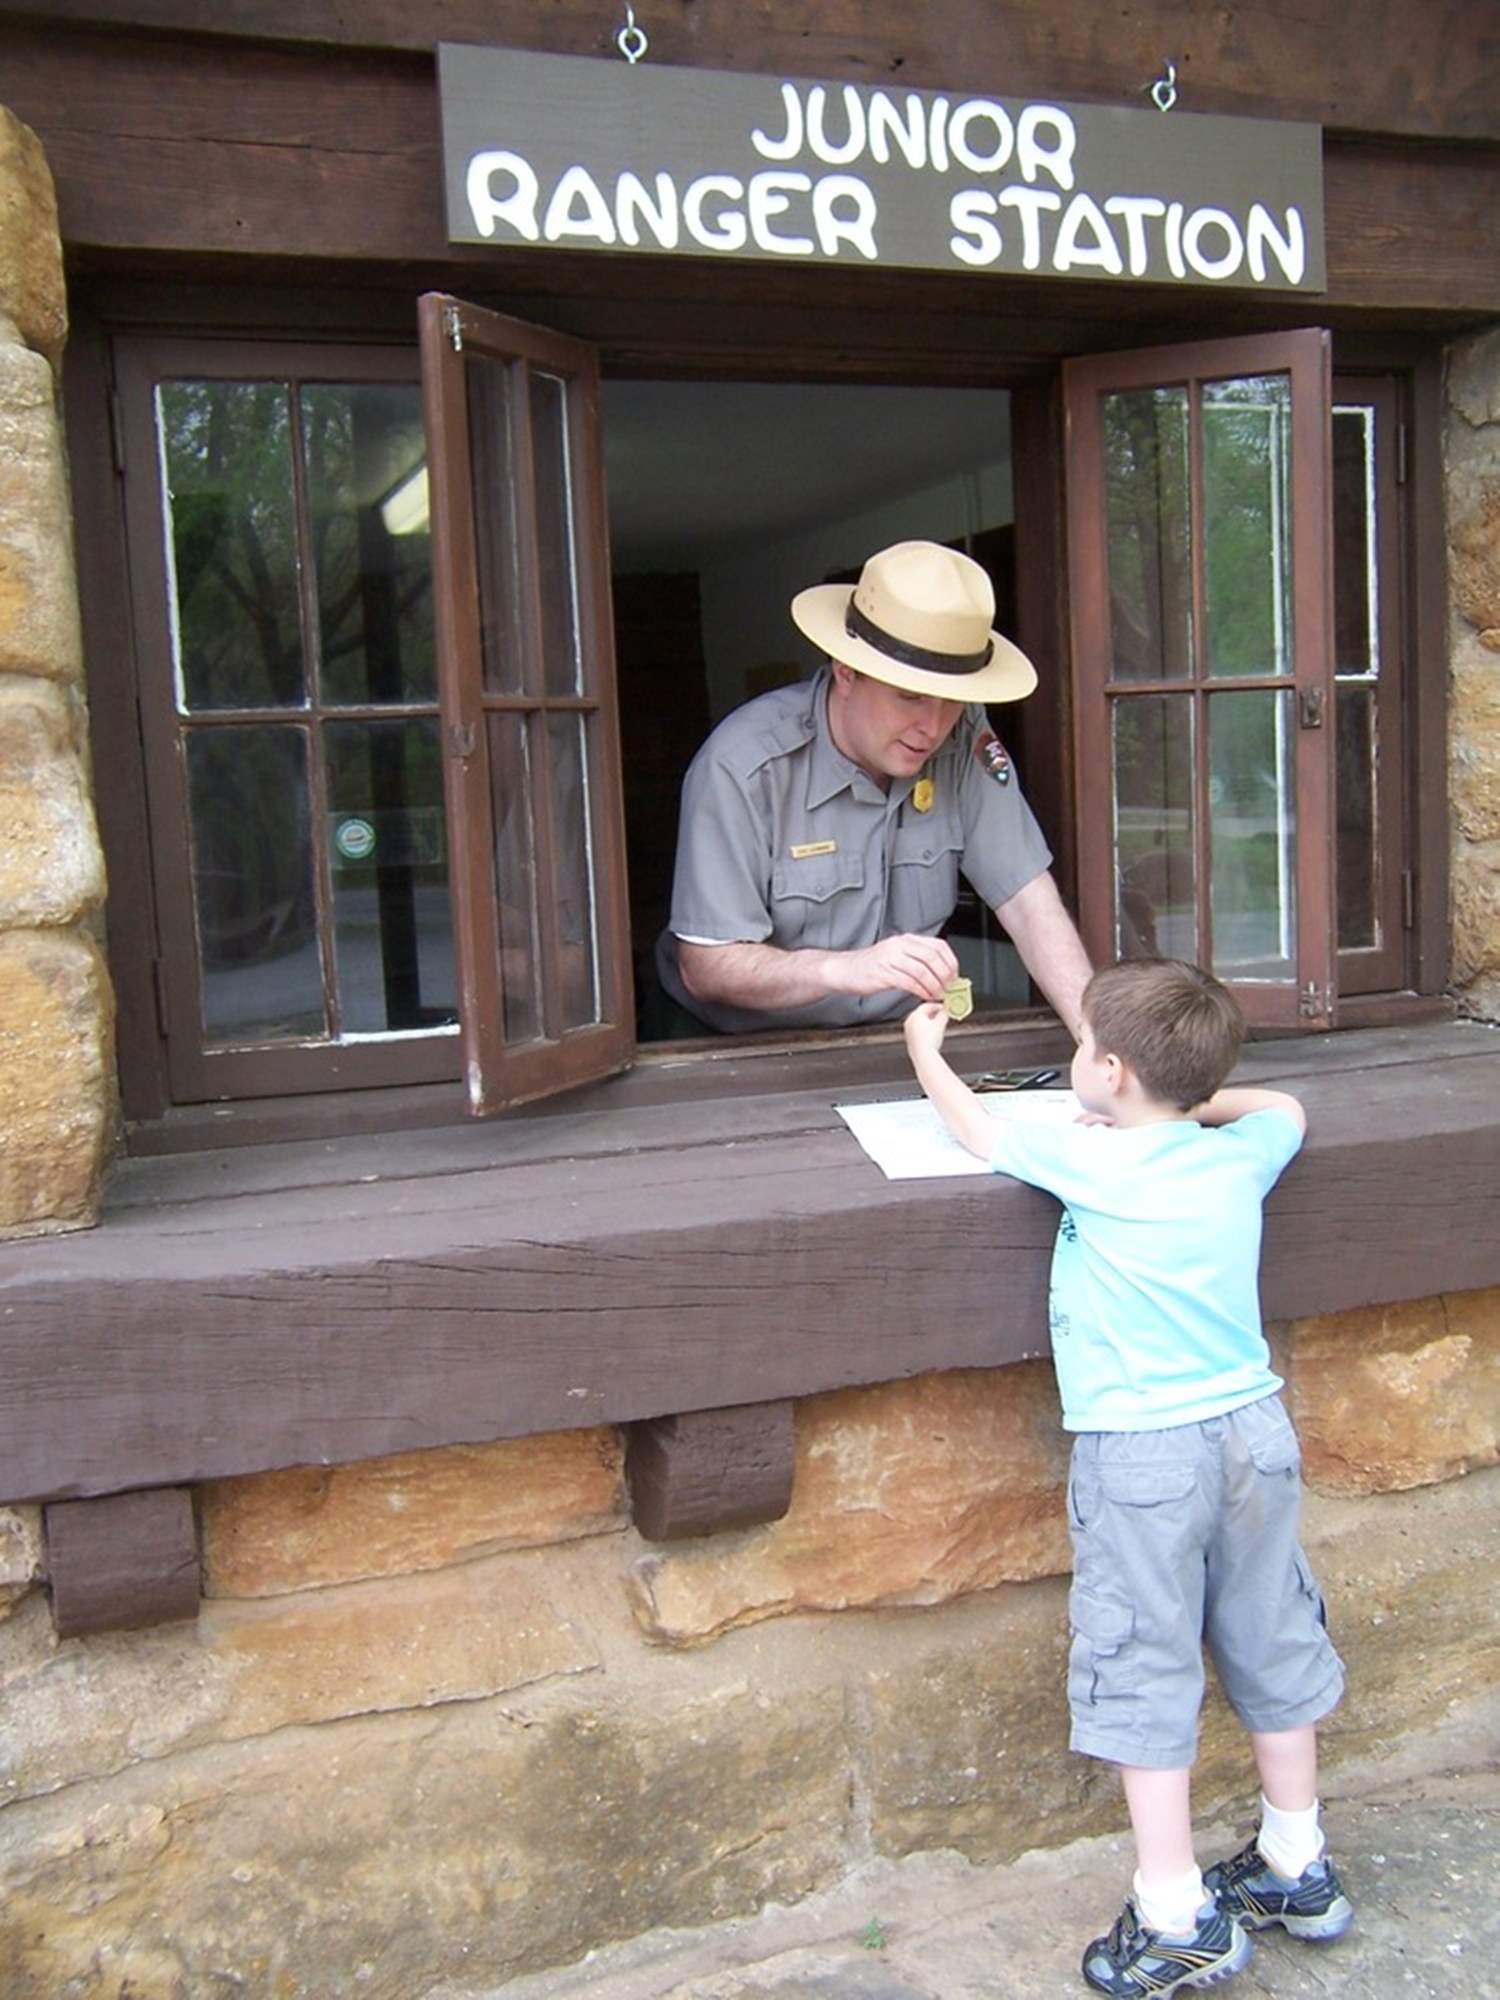 Man in broad brim hat and uniform with shield-shaped badge on his shirt leans out the Junior Ranger Station window to hand a boy a shield shaped badge.